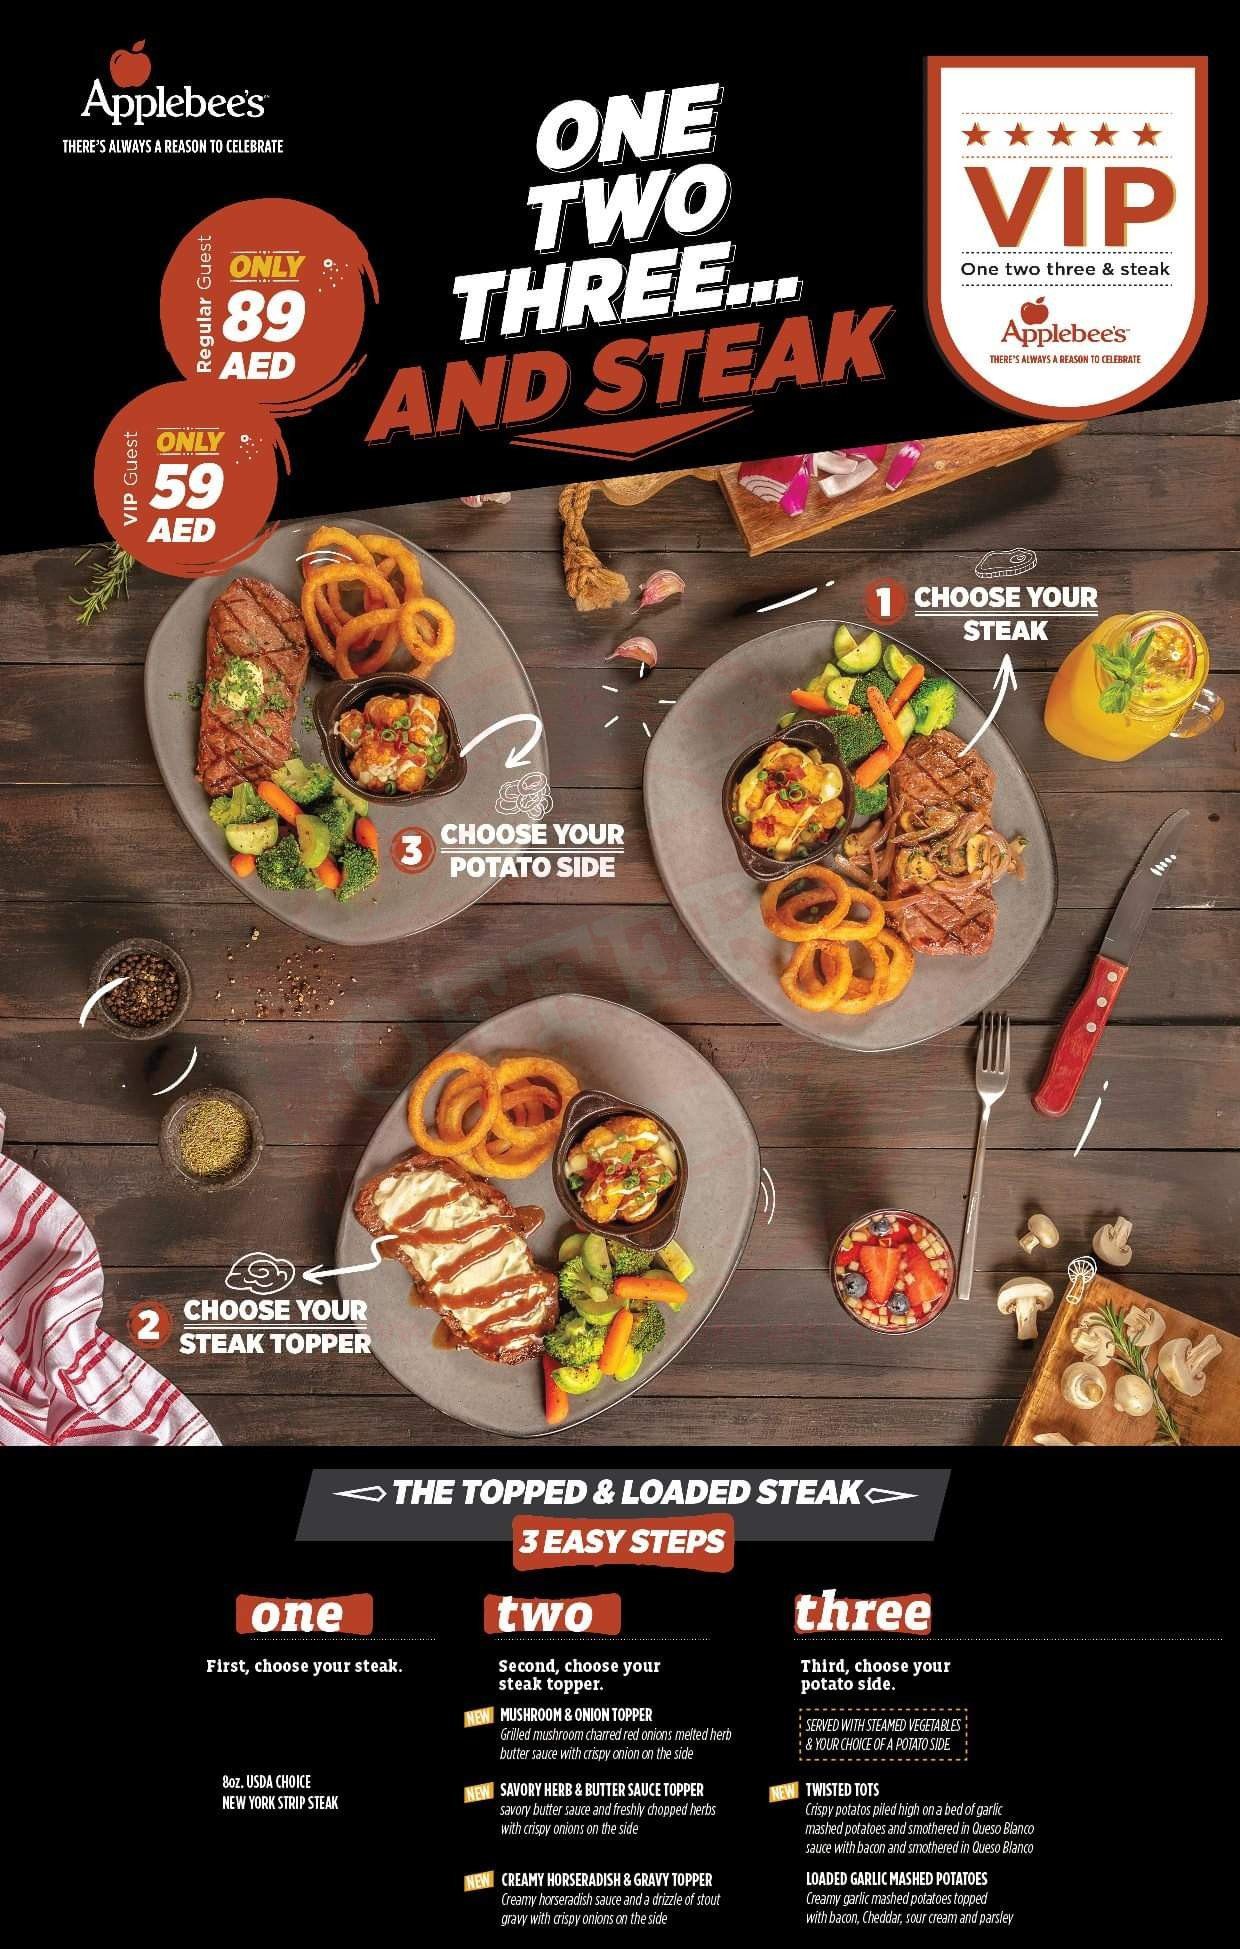 Steak, choice of steak topper and choice of potato side only at AED 59 at Applebee’s